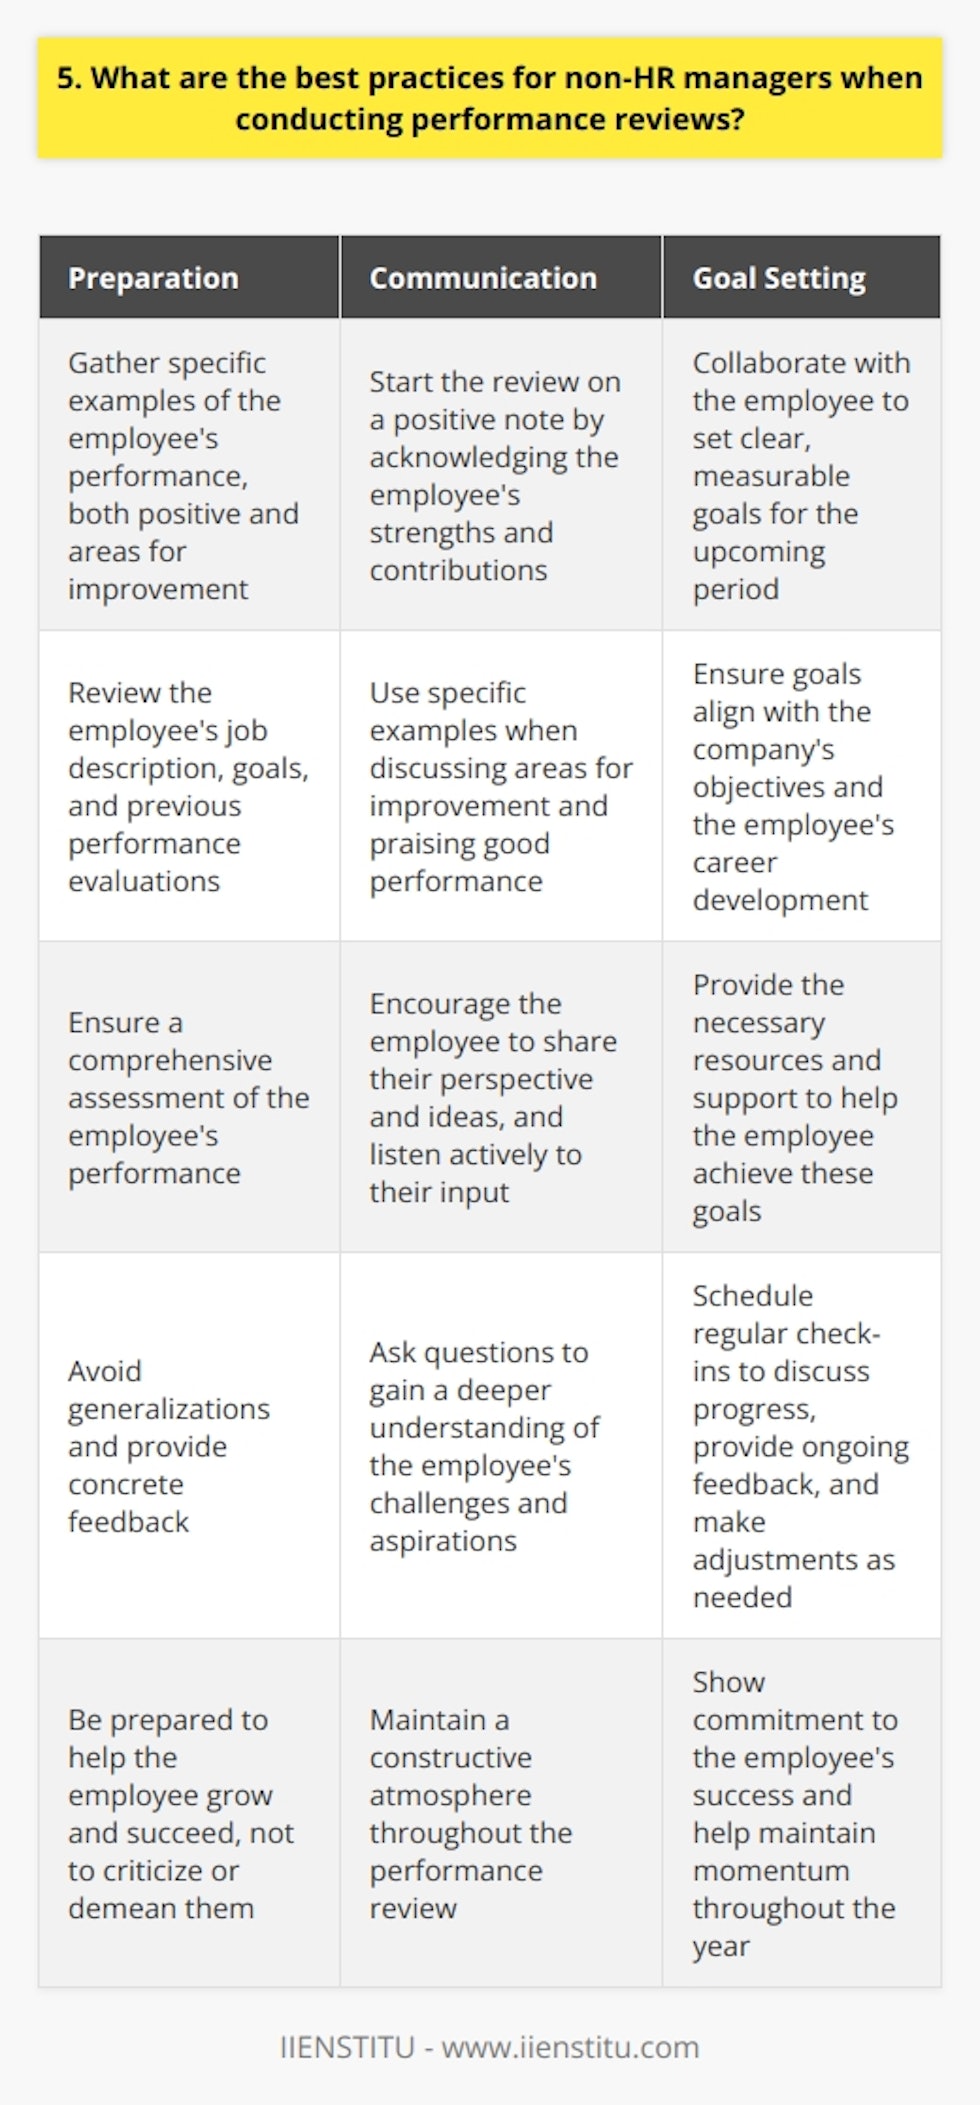 As a non-HR manager, there are several best practices to follow when conducting performance reviews: Be Prepared Before the review, gather specific examples of the employees performance, both positive and areas for improvement. This helps you provide concrete feedback and avoid generalizations. Review the employees job description, goals, and previous performance evaluations to ensure a comprehensive assessment. Set a Positive Tone Start the review on a positive note by acknowledging the employees strengths and contributions. This sets a constructive atmosphere and makes the employee more receptive to feedback. Remember, the goal is to help the employee grow and succeed, not to criticize or demean them. Use Specific Examples When discussing areas for improvement, provide specific examples of situations where the employee could have performed better. This helps them understand exactly what needs to change. Similarly, when praising good performance, cite specific instances that demonstrate the employees strengths and accomplishments. Listen Actively Performance reviews should be a two-way conversation. Encourage the employee to share their perspective and ideas. Listen carefully to their input and ask questions to gain a deeper understanding of their challenges and aspirations. Set Clear Goals Collaborate with the employee to set clear, measurable goals for the upcoming period. These should align with the companys objectives and the employees career development. Provide the necessary resources and support to help the employee achieve these goals. Follow Up Performance reviews shouldnt be a one-time event. Schedule regular check-ins to discuss progress, provide ongoing feedback, and make adjustments as needed. This shows your commitment to the employees success and helps maintain momentum throughout the year.